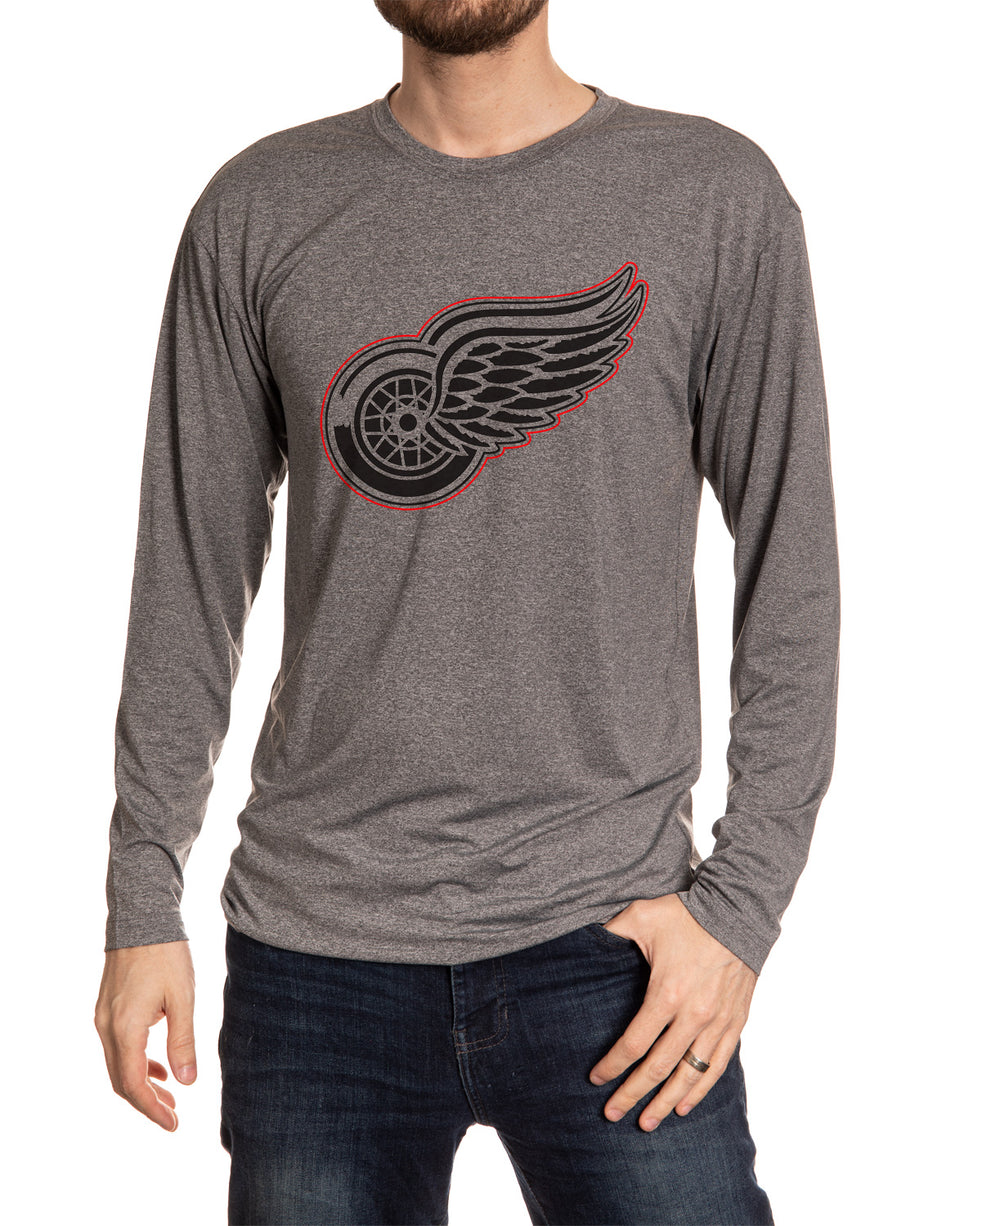 Detroit Red Wings Premium Apparel and Leisurewear